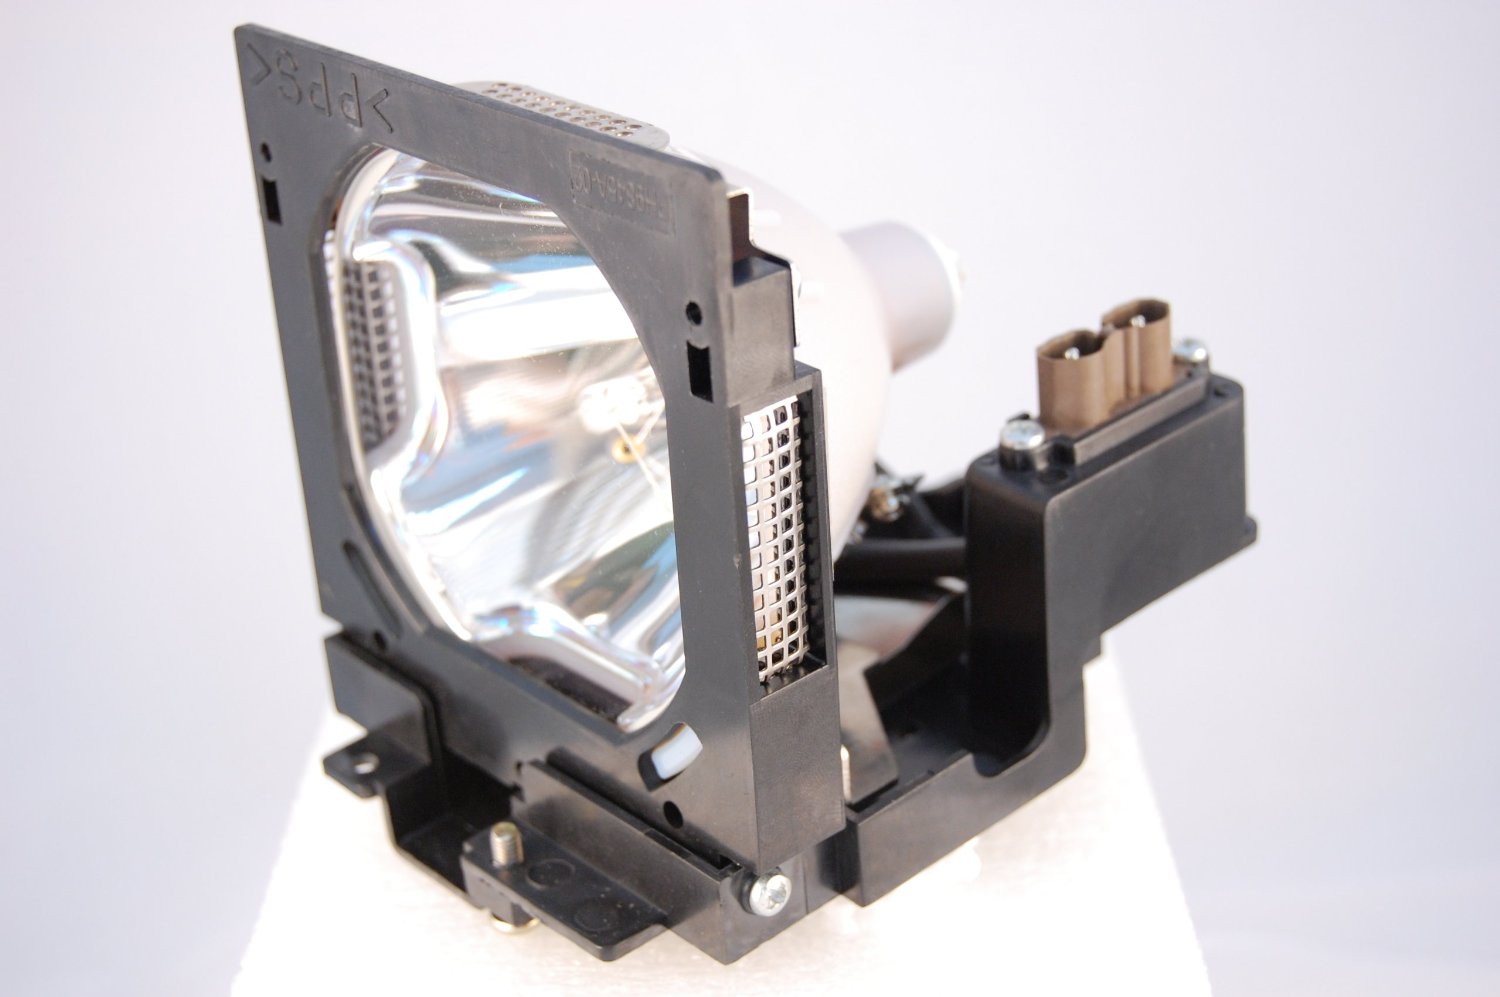 LC-W4 Eiki Projector Lamp Replacement. Projector Lamp Assembly with High Quality Genuine Original Osram P-VIP Bulb Inside